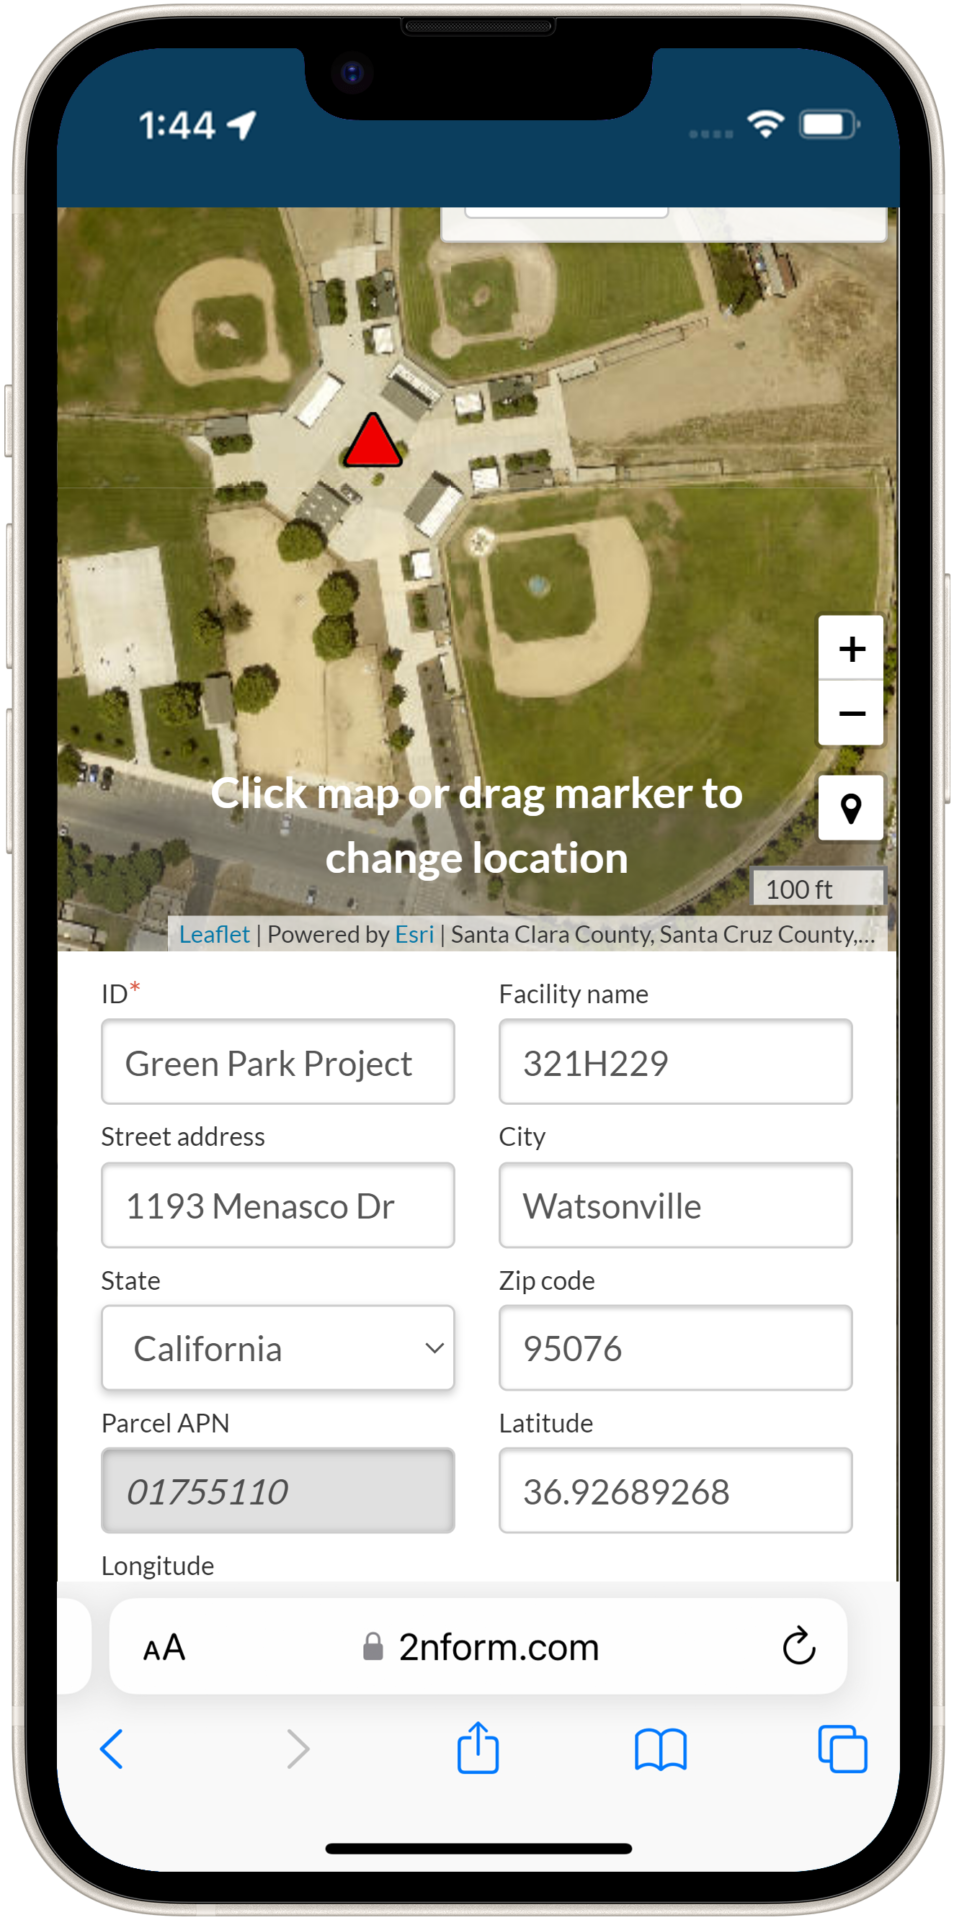 2NFORM on smartphone shows the location of proposed sBMP